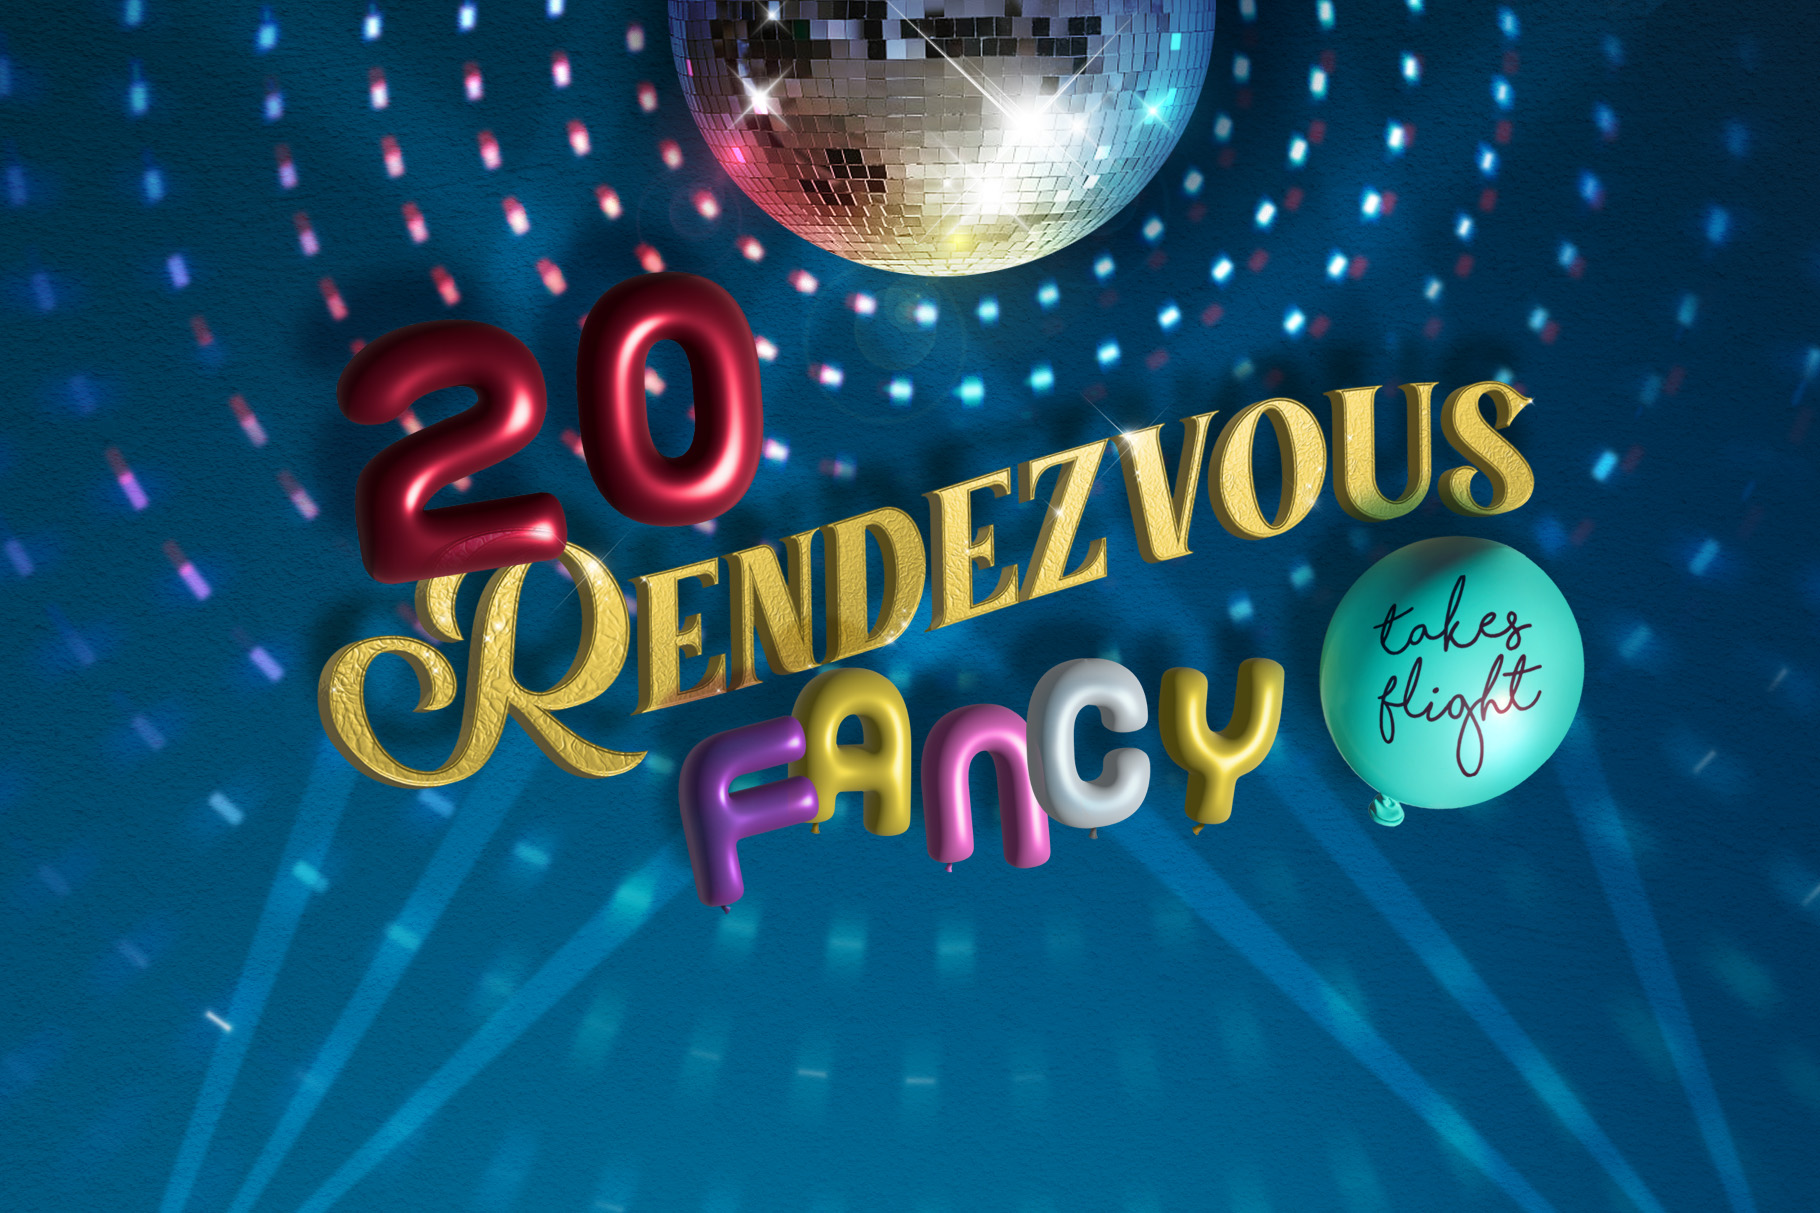 The words “20 Rendezvous fancy takes flight” are displayed below a disco light with lights being aimed at it from below. The lights reflect onto the blue background. Both “20” and the word “Fancy” are individual character balloons, while “takes flight” is written in marker on a regular aqua balloon. “Rendezvous” is written in gold letters, below “20” and above “fancy takes flight”.